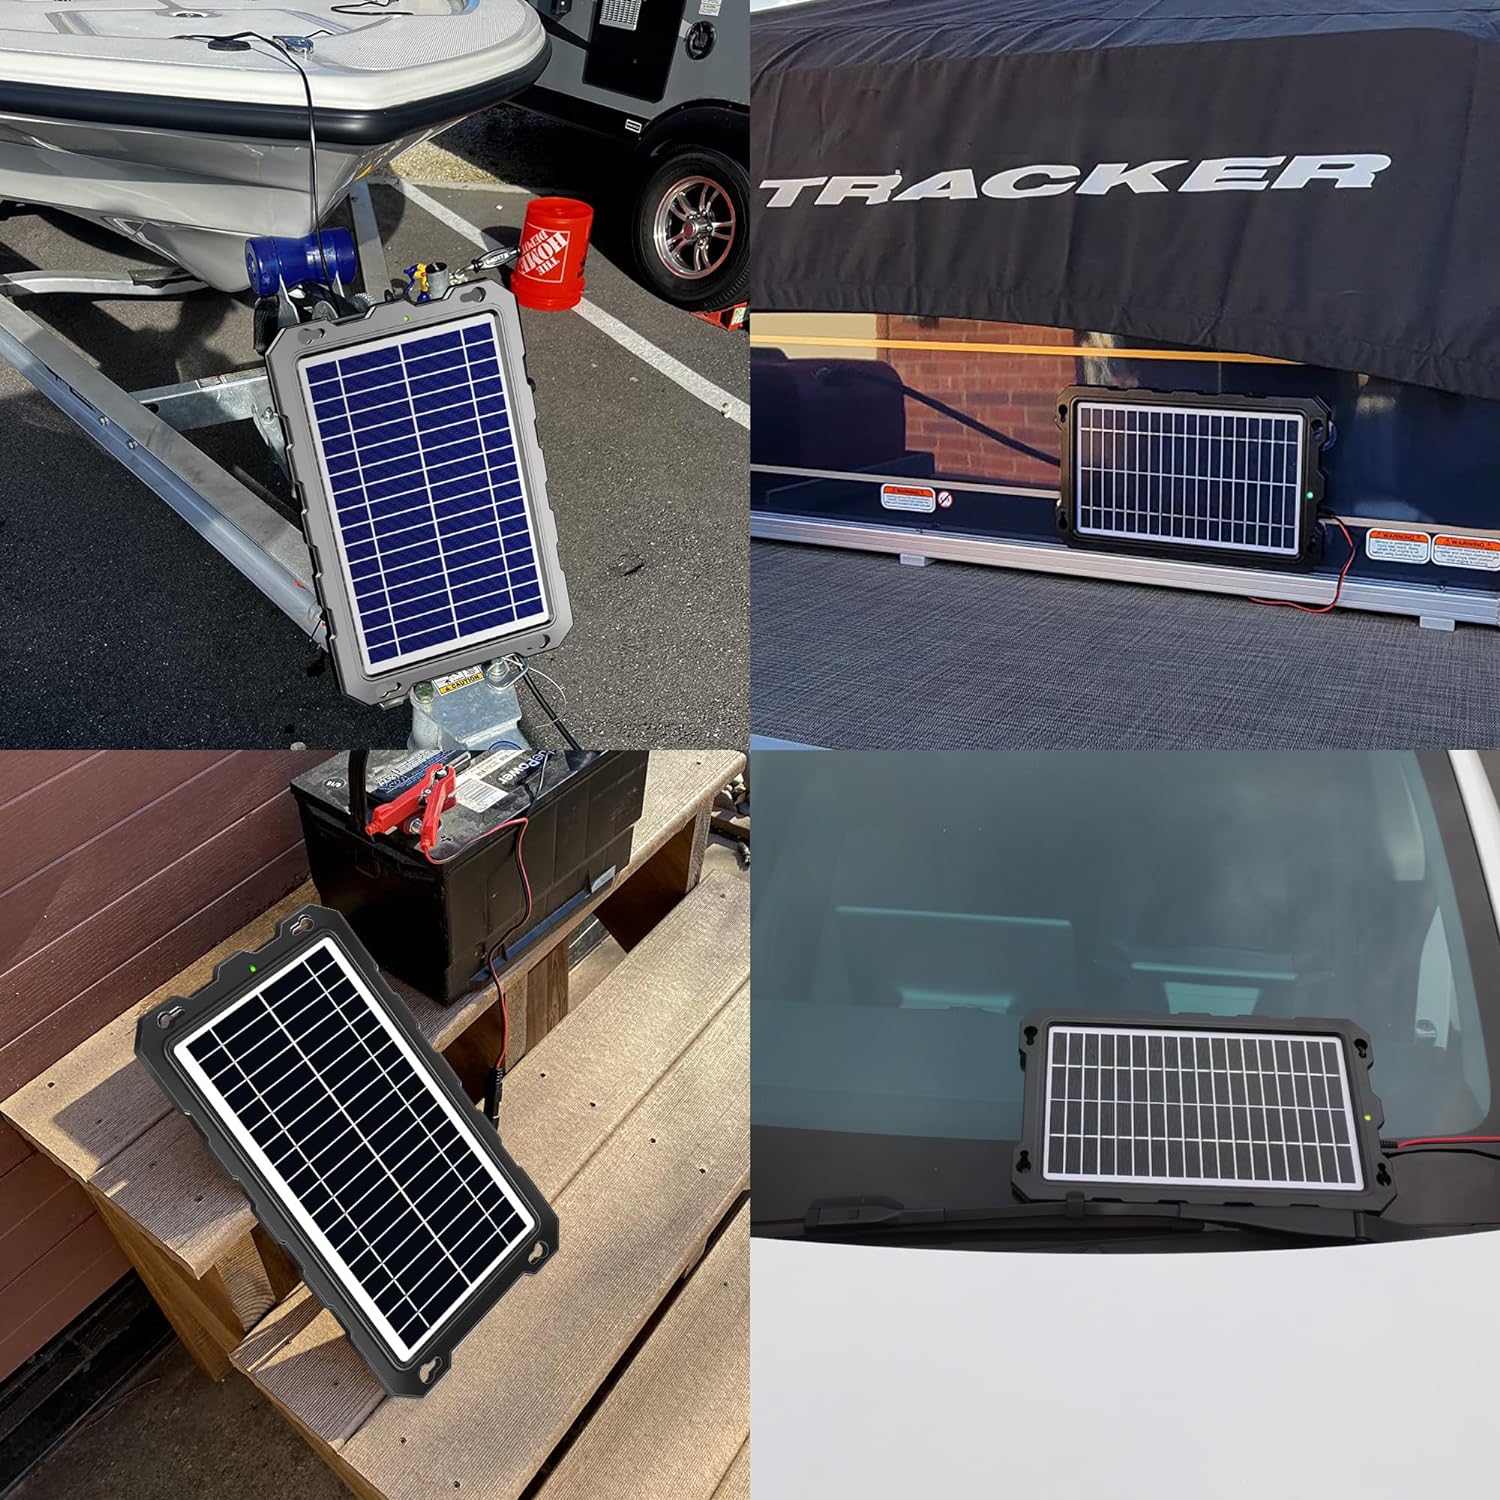 SUNAPEX Solar Trickle Charger Review